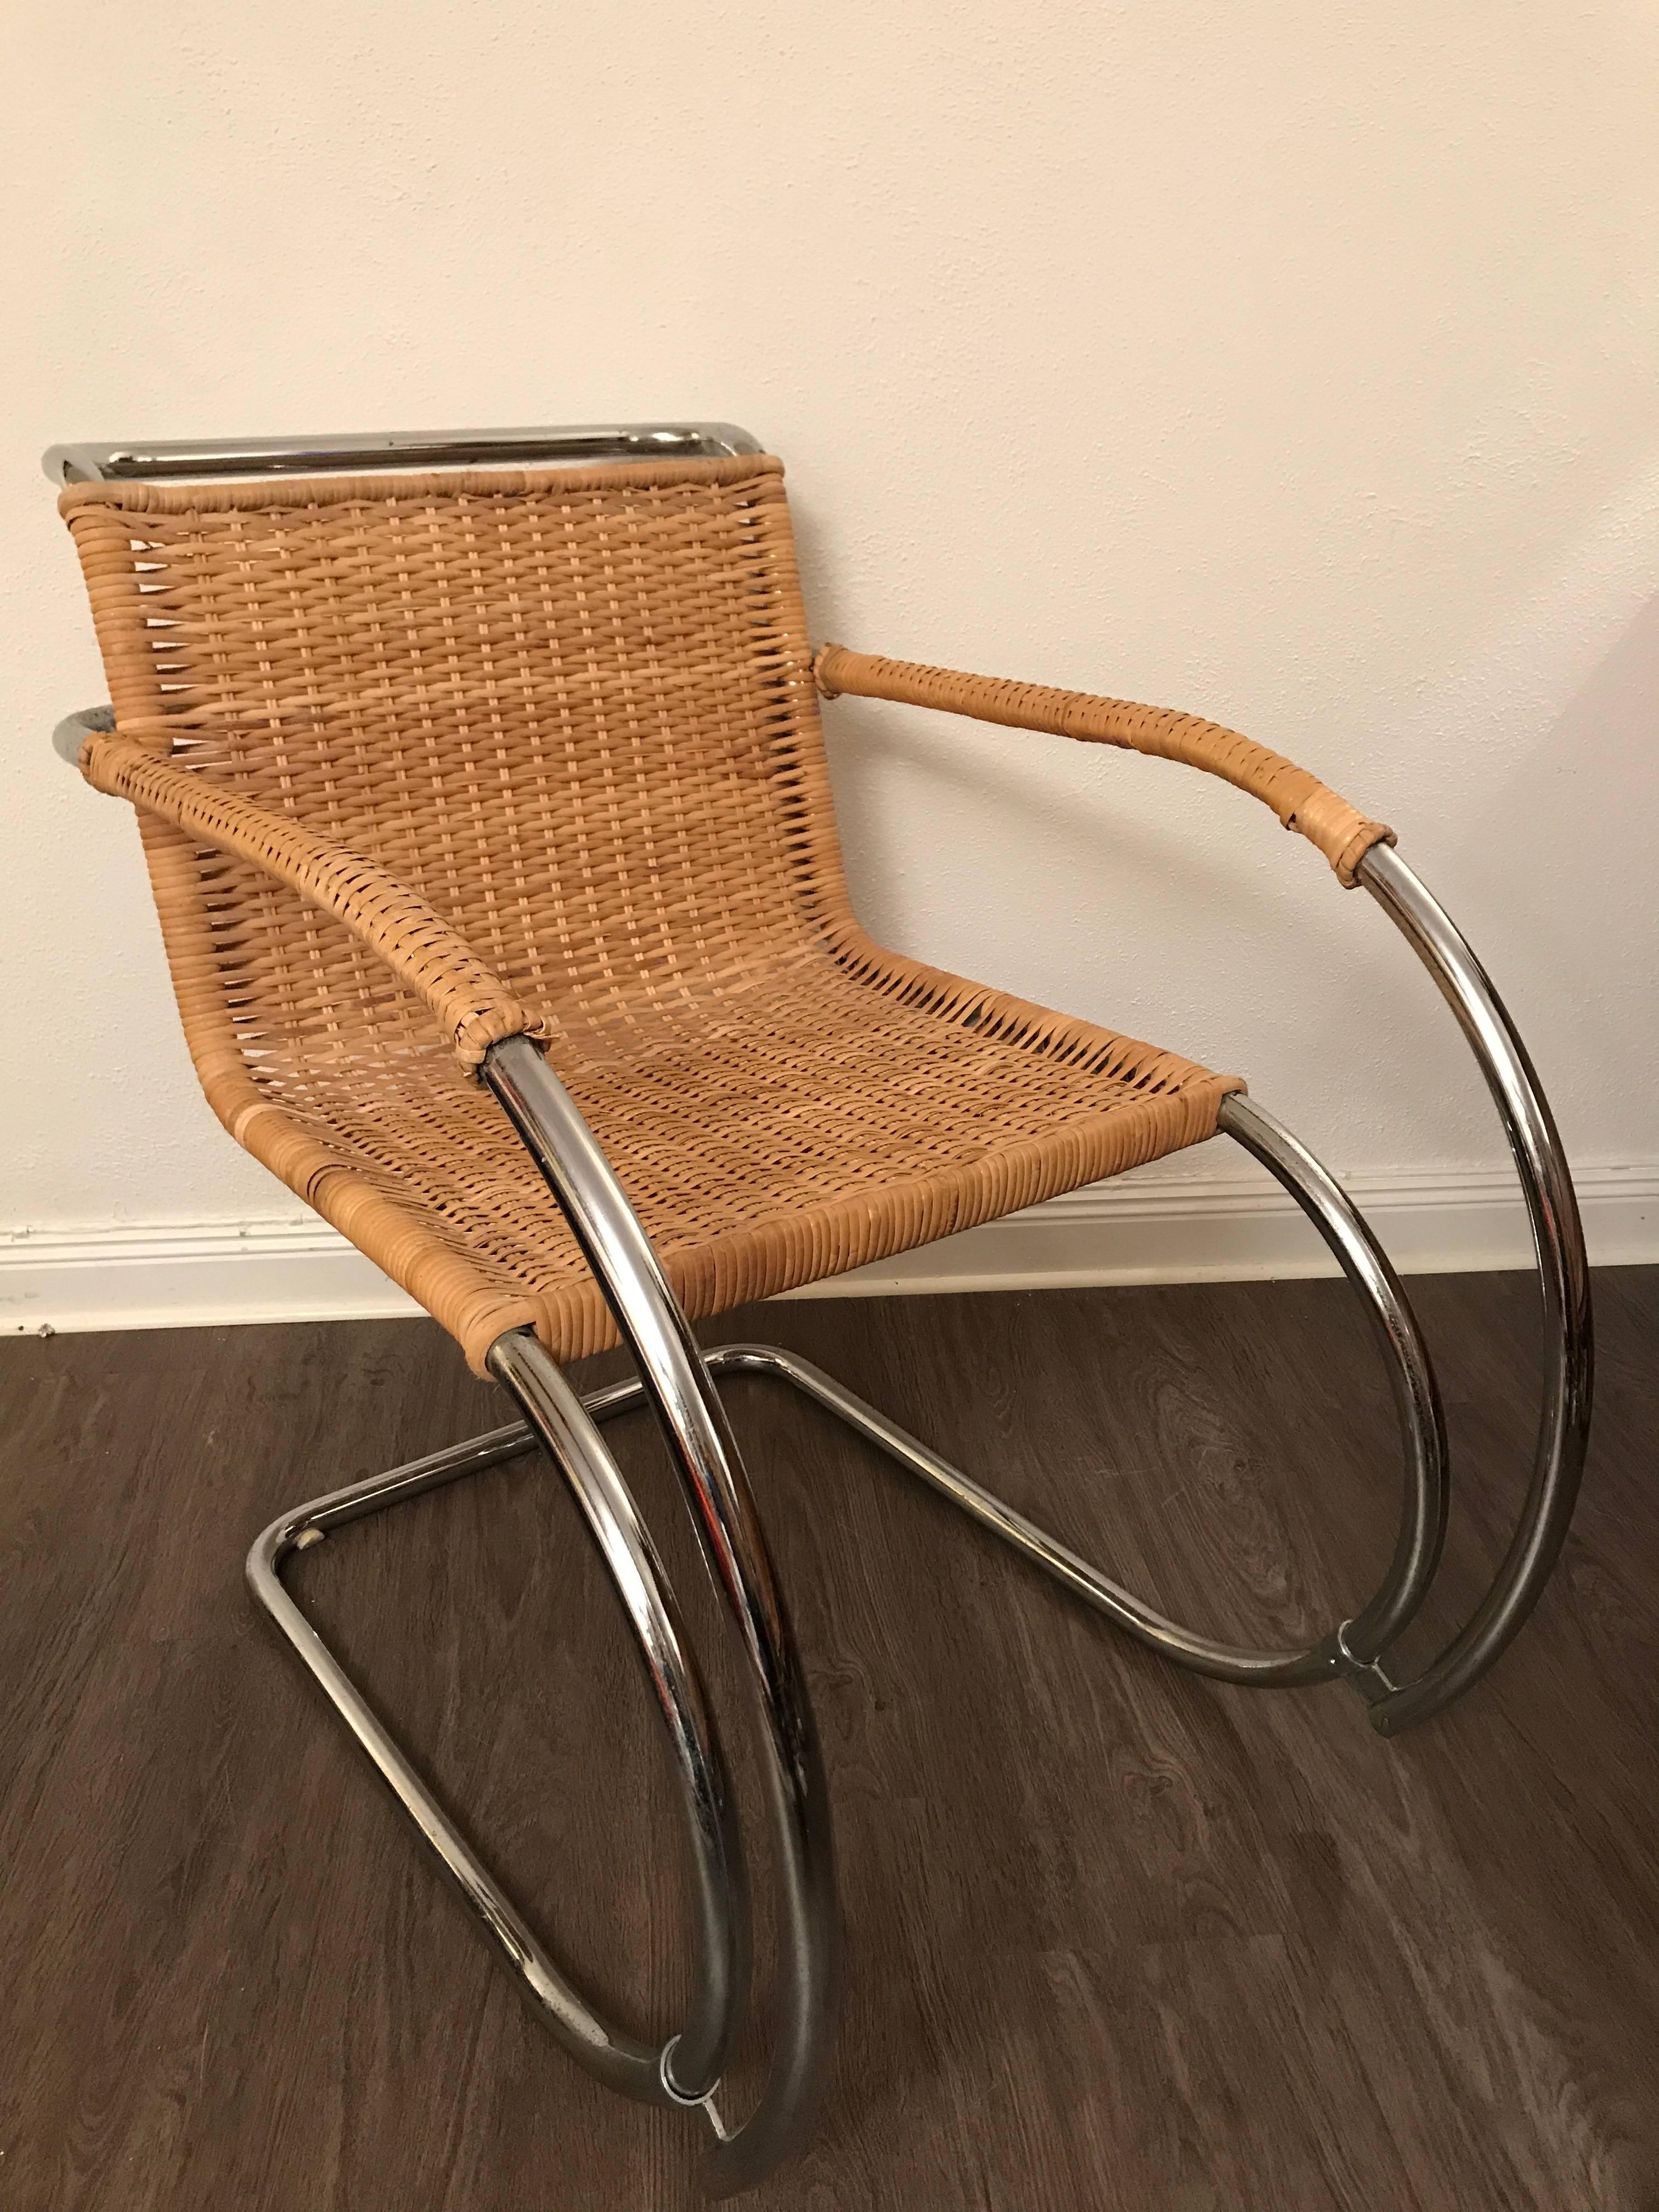 Pair of mid-20th century Mies van der Rohe MR20 Rattan chrome armchairs.
These chairs are most likely made in the mid-20th century. They will be in a excellent original condition and the rattan arm rests will be totally restored to original top